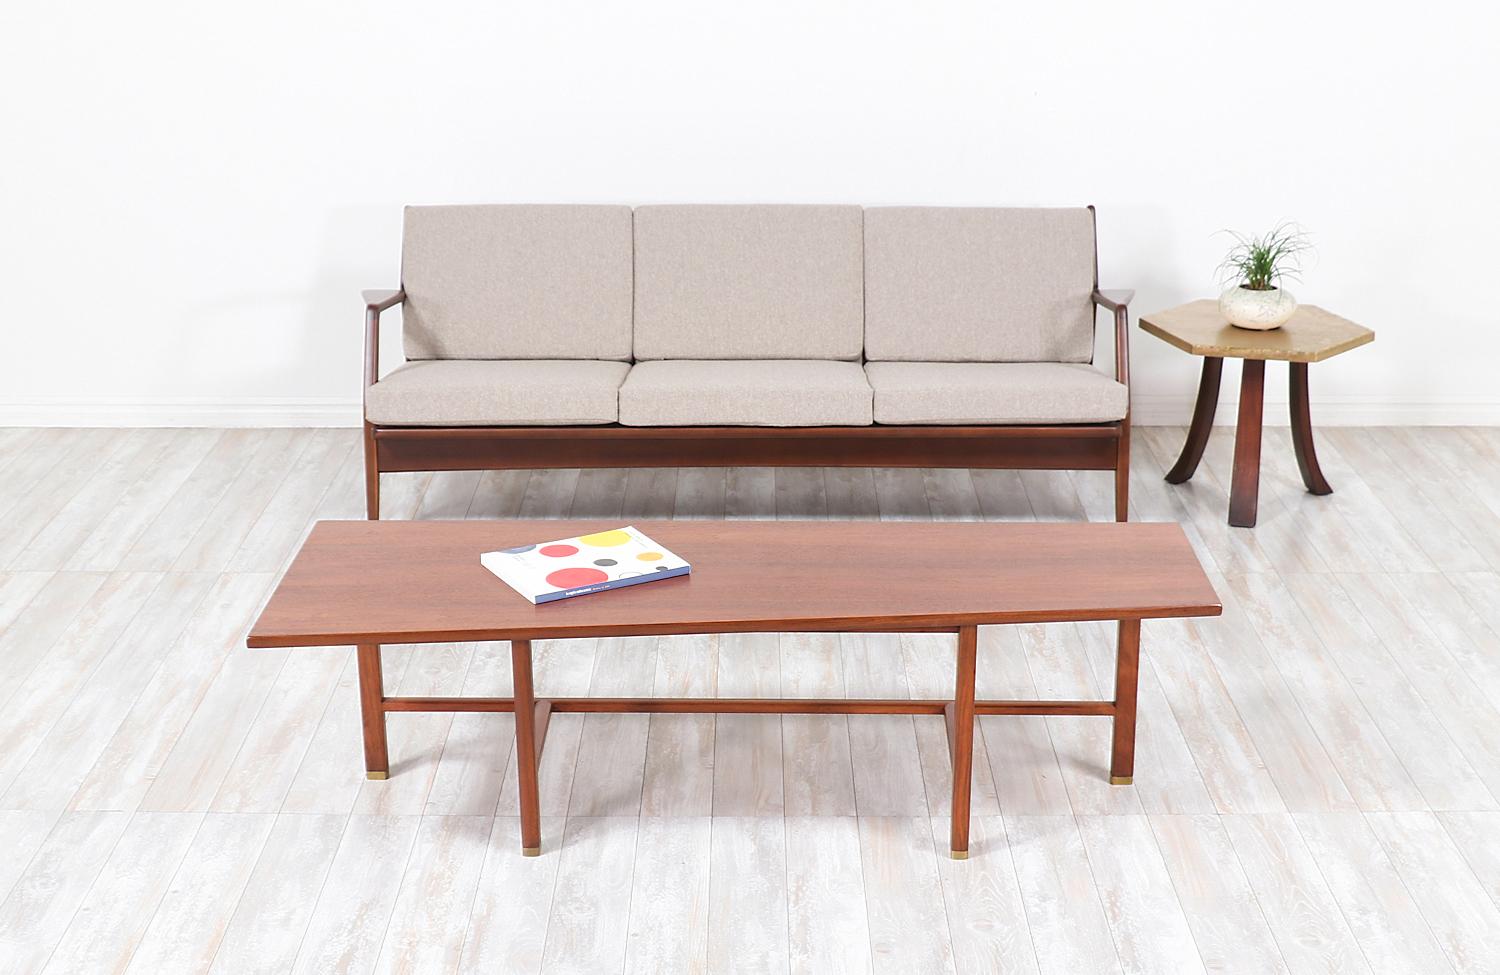 Beautiful coffee table designed by Edward J. Wormley for Dunbar in the United States circa 1950s. This fascinating coffee table features a sturdy walnut wood frame with intersecting stretchers at the base and rectangular brass caps on the feet tips.